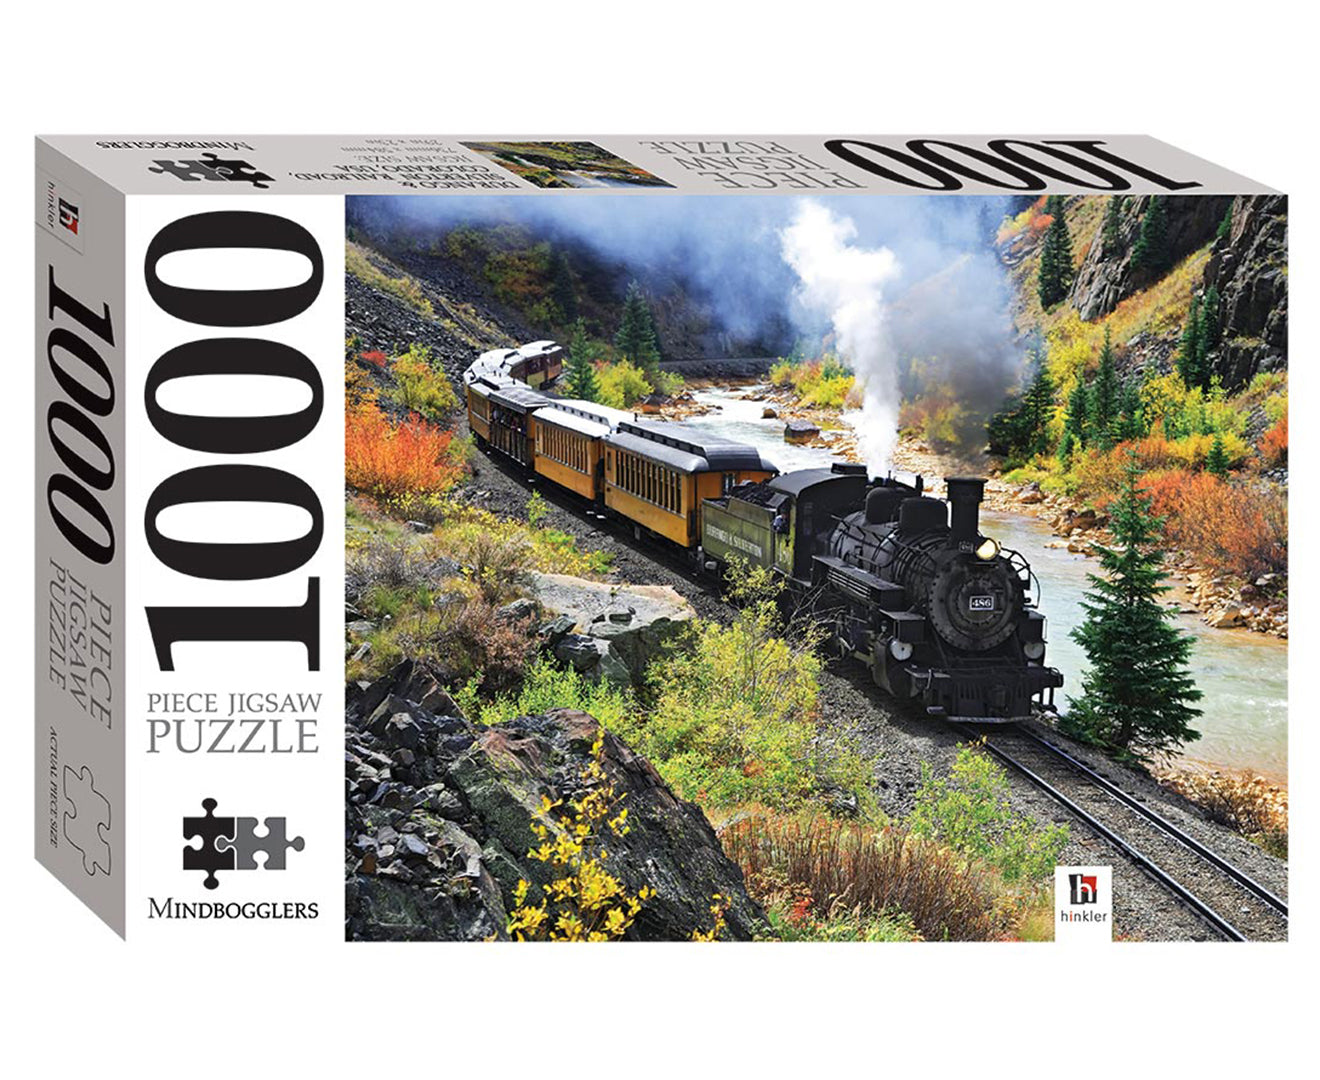 Mindbogglers 1000 Piece Puzzle | Tabernacle Games